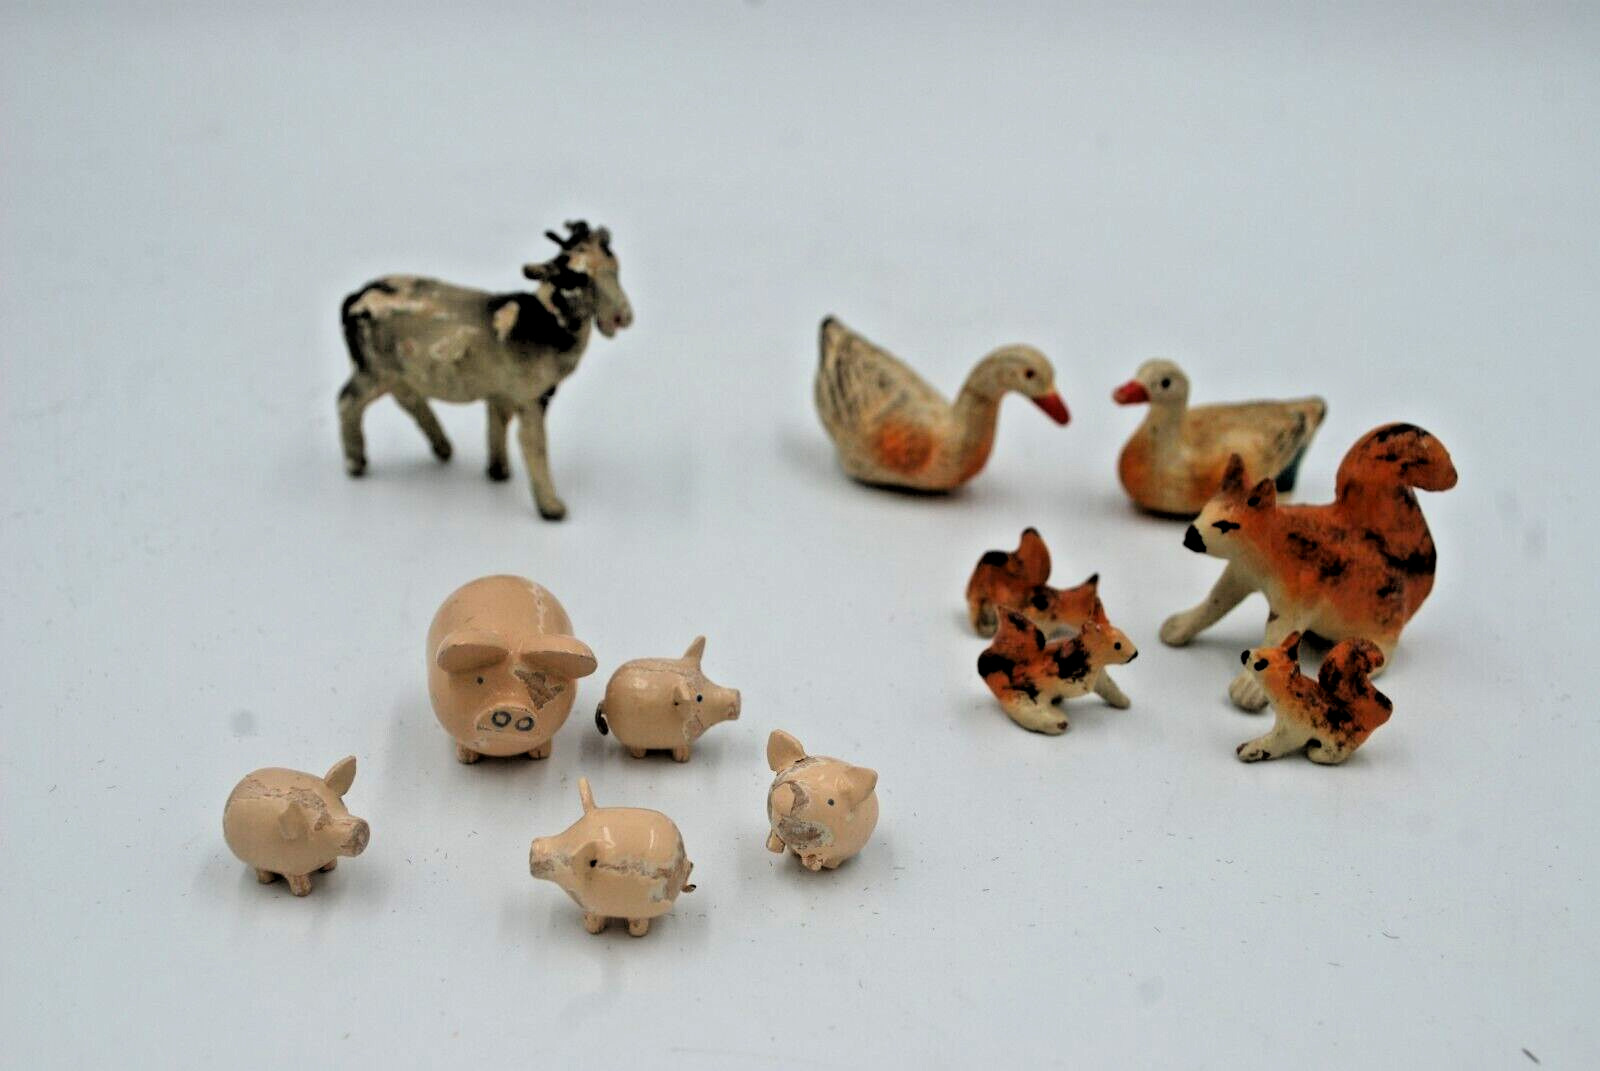 Vintage Farmyard Animal Collectibles, Tiny, Pigs, Goat, Ducks & Squirrel Family